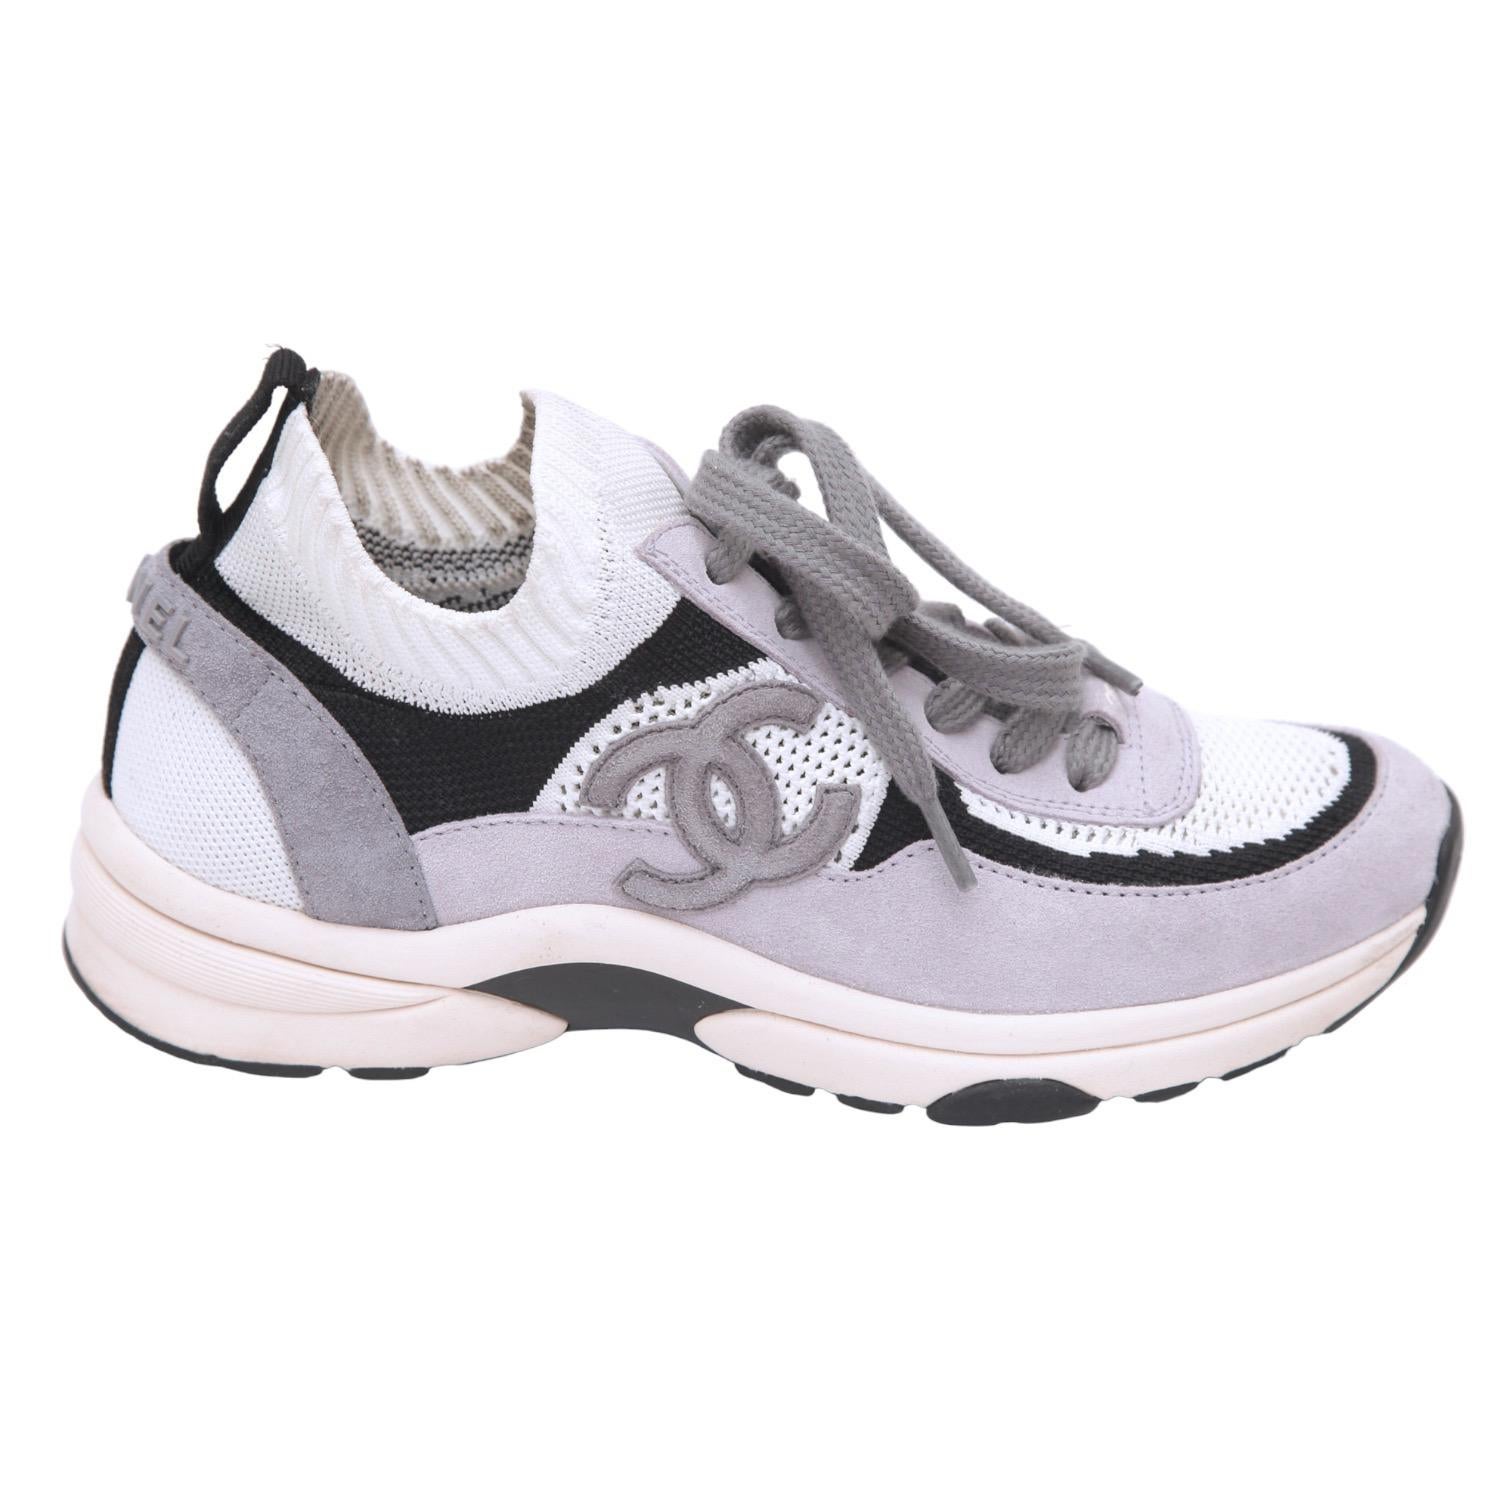 GUARANTEED AUTHENTIC CHANEL 2022 MESH SUEDE WHITE LIGHT LAVENDER SNEAKERS

Retail excluding sales taxes $1195

Design:
- White mer fabric and suede uppers.
- Suede CC at sides.
- Fabric insoles.
- Rubber soles.
- Comes with dust bag.

Size: